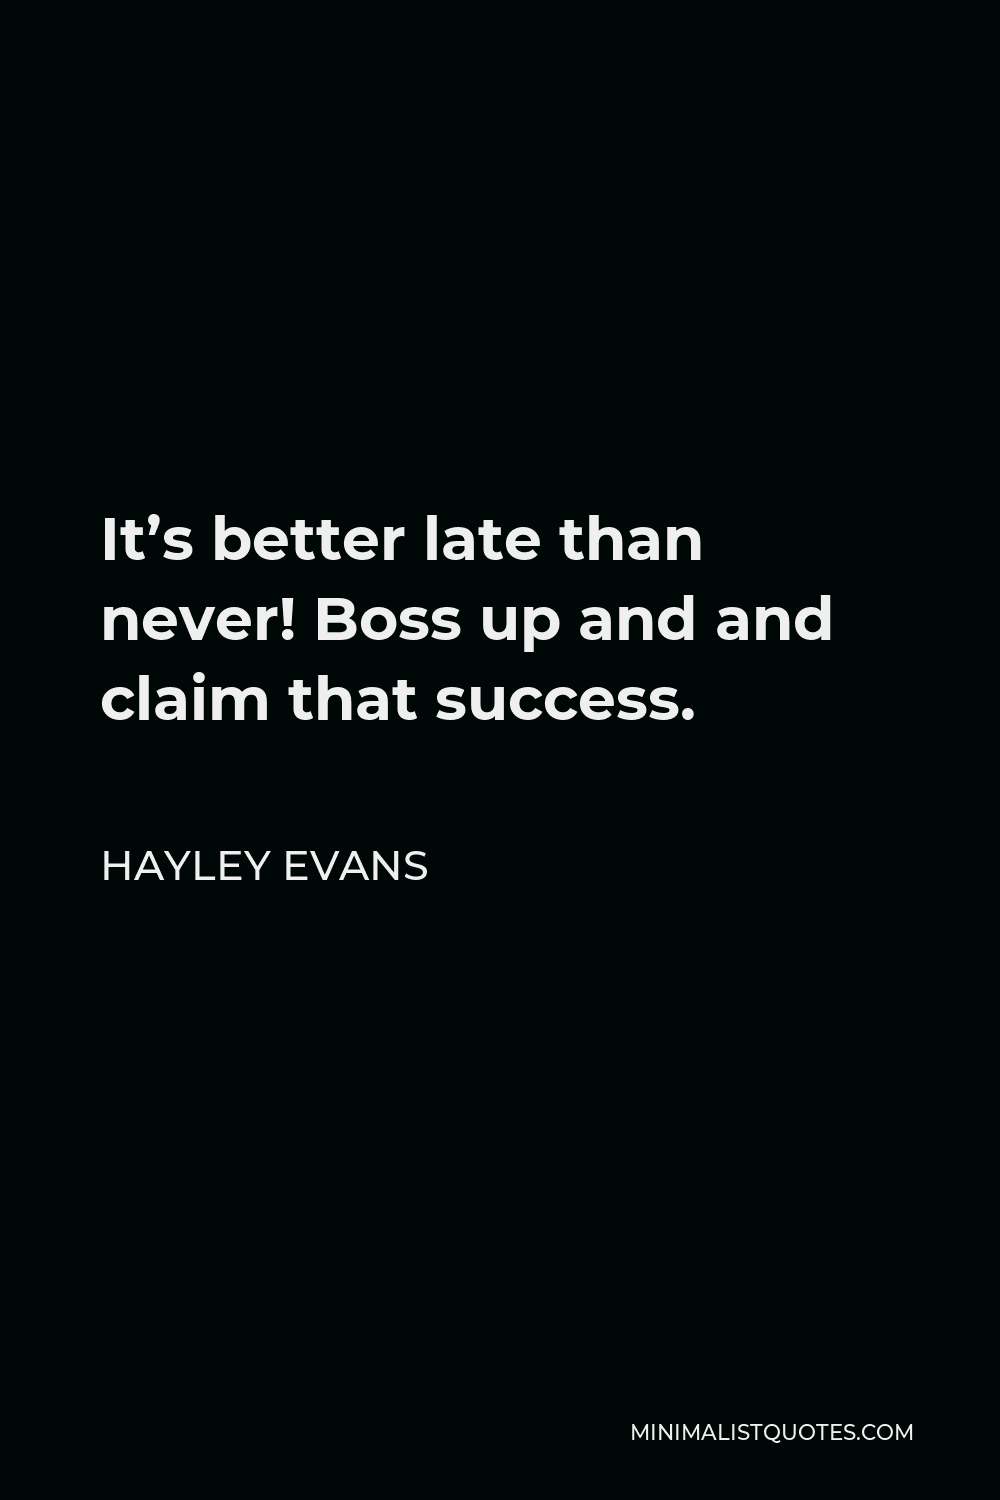 Hayley Evans Quote - It’s better late than never! Boss up and and claim that success.